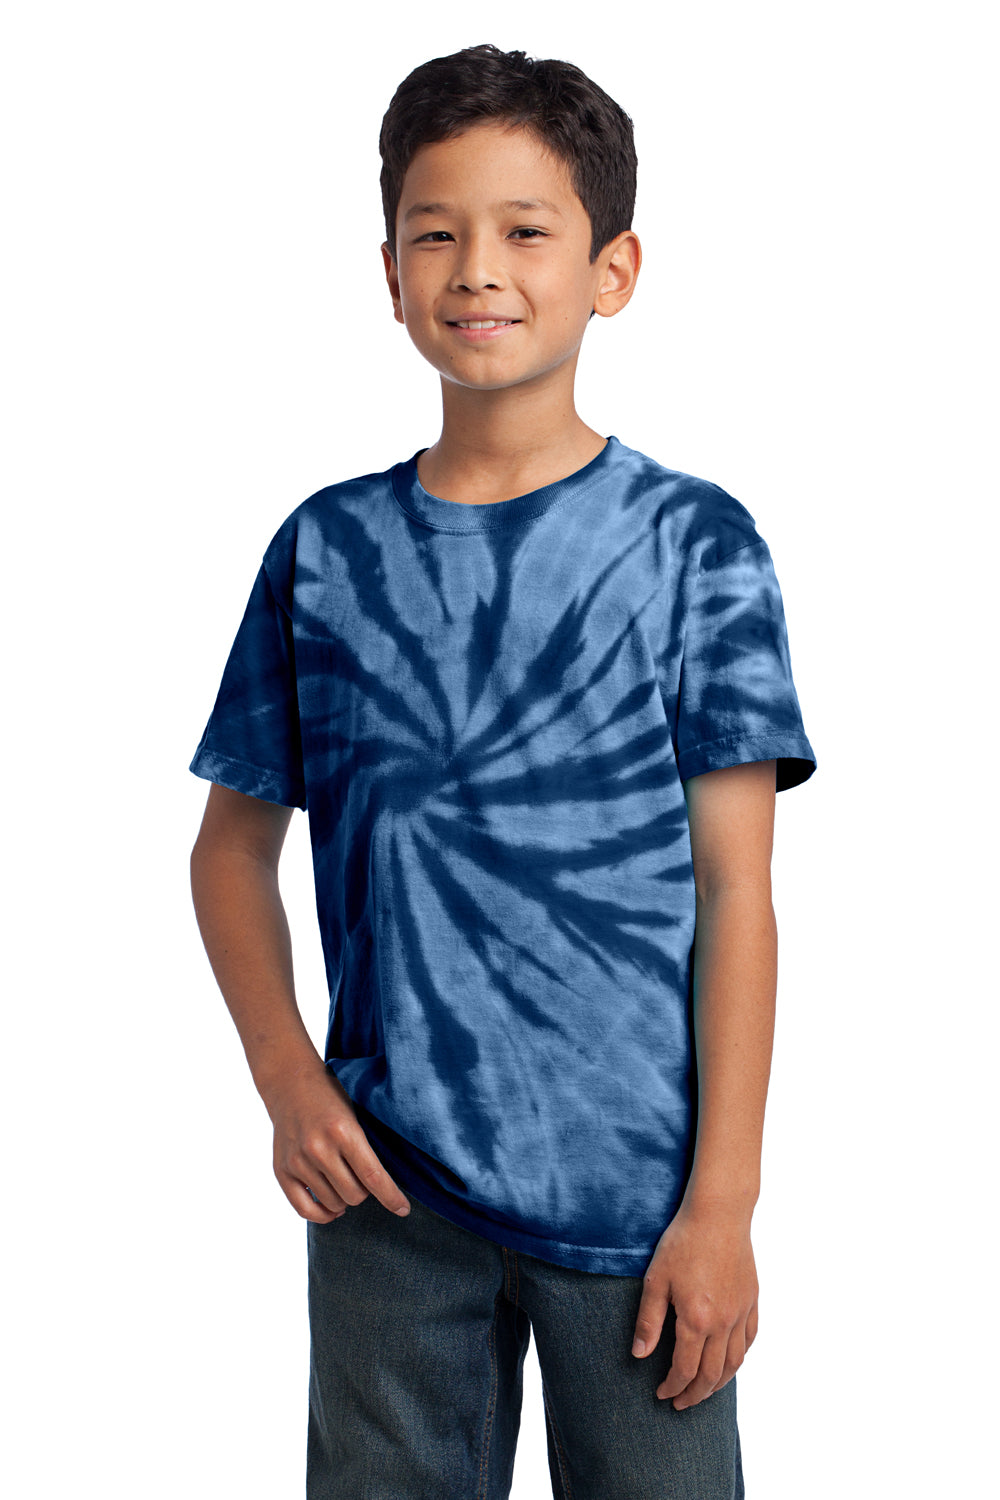 Port & Company PC147Y Youth Tie-Dye Short Sleeve Crewneck T-Shirt Navy Blue Front